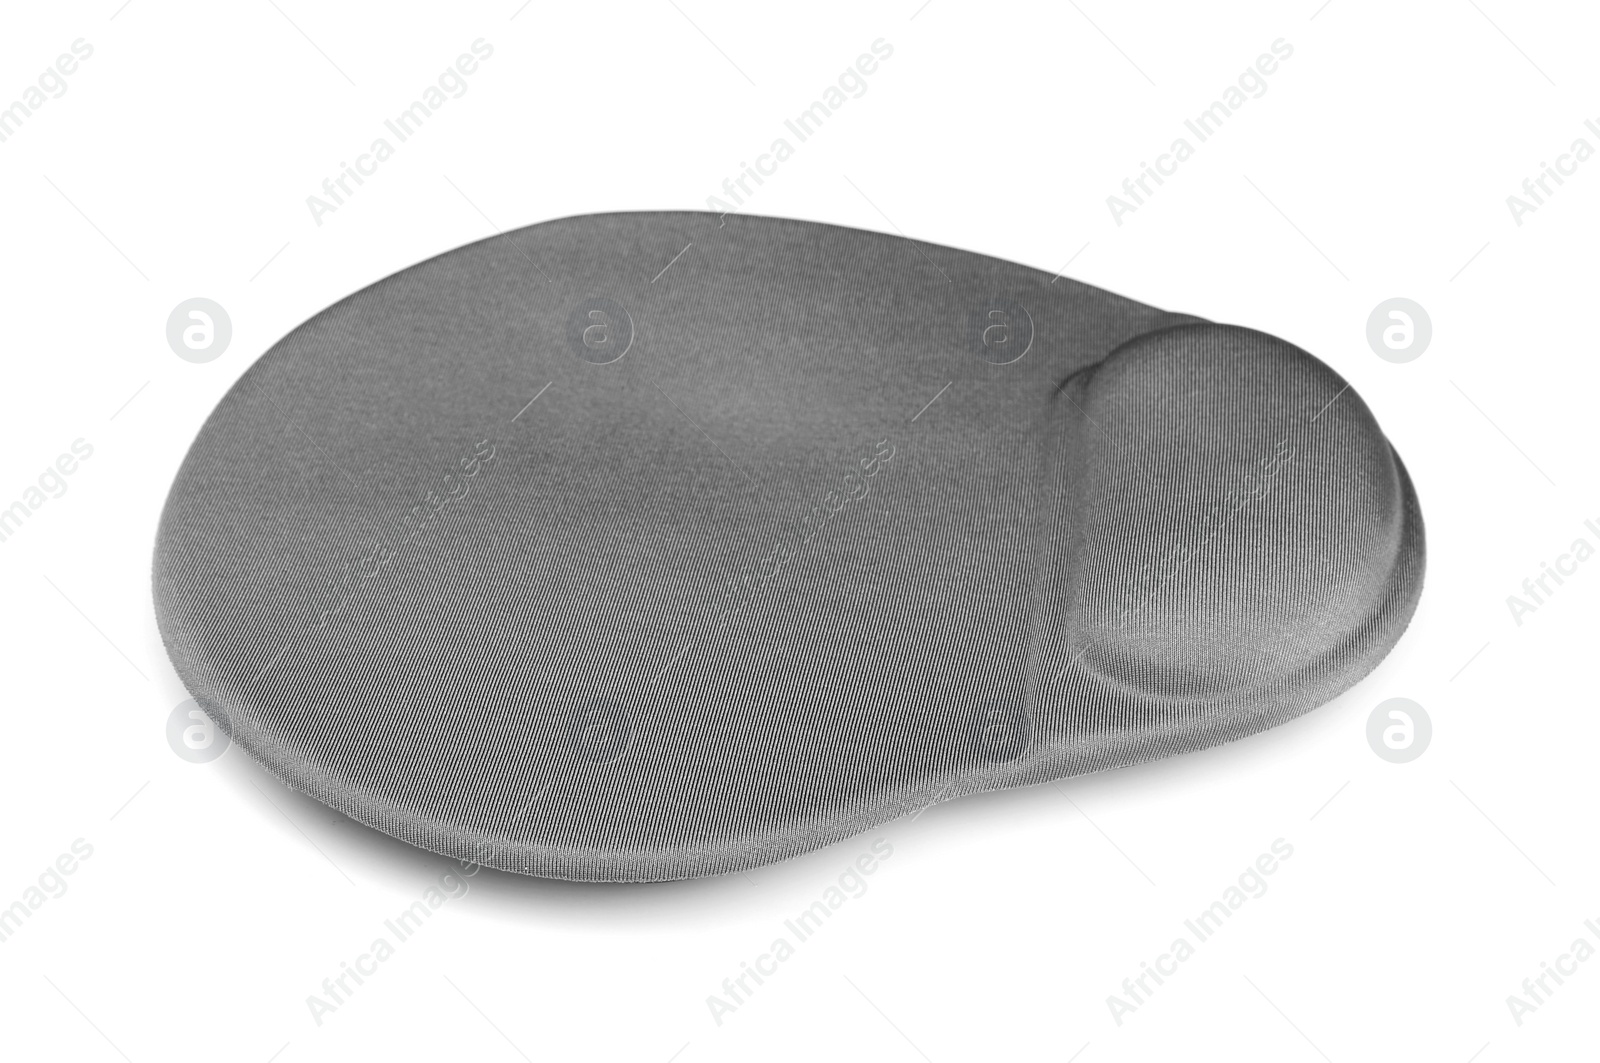 Photo of Mouse pad on white background